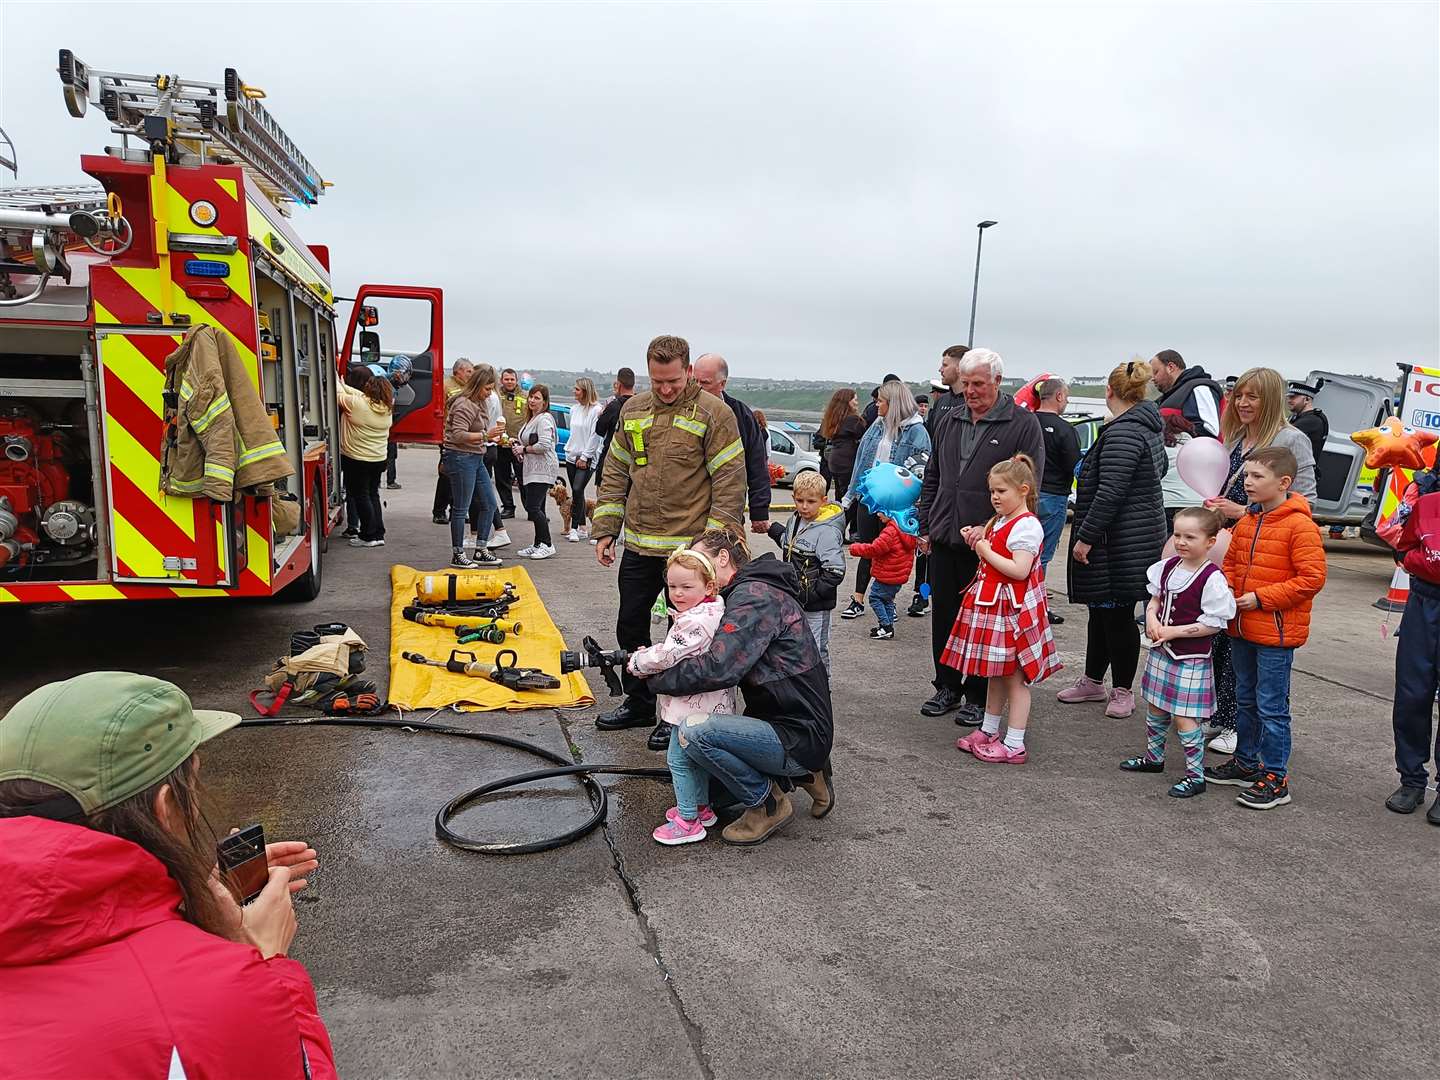 Youngsters queuing to get a close-up look at a fire engine.